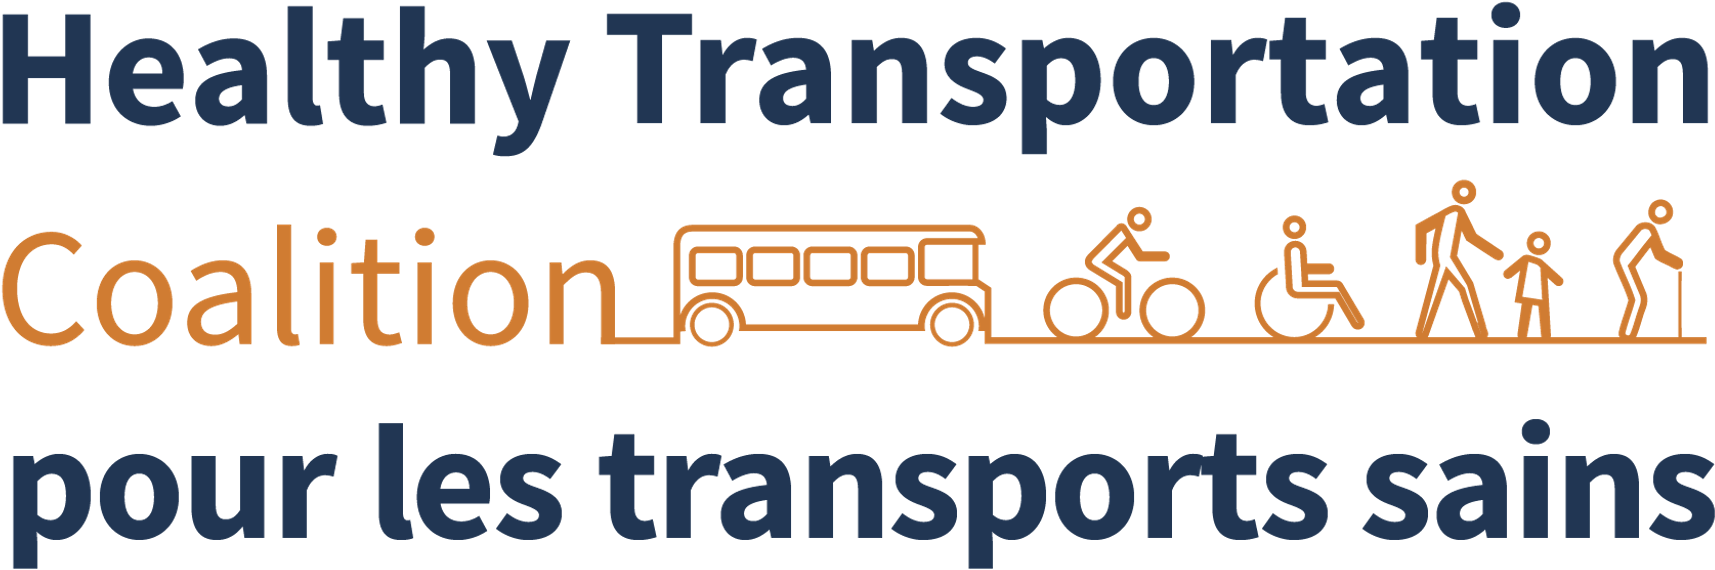 Healthy Transportation Coalition - Transportation Healthy (1920x896), Png Download